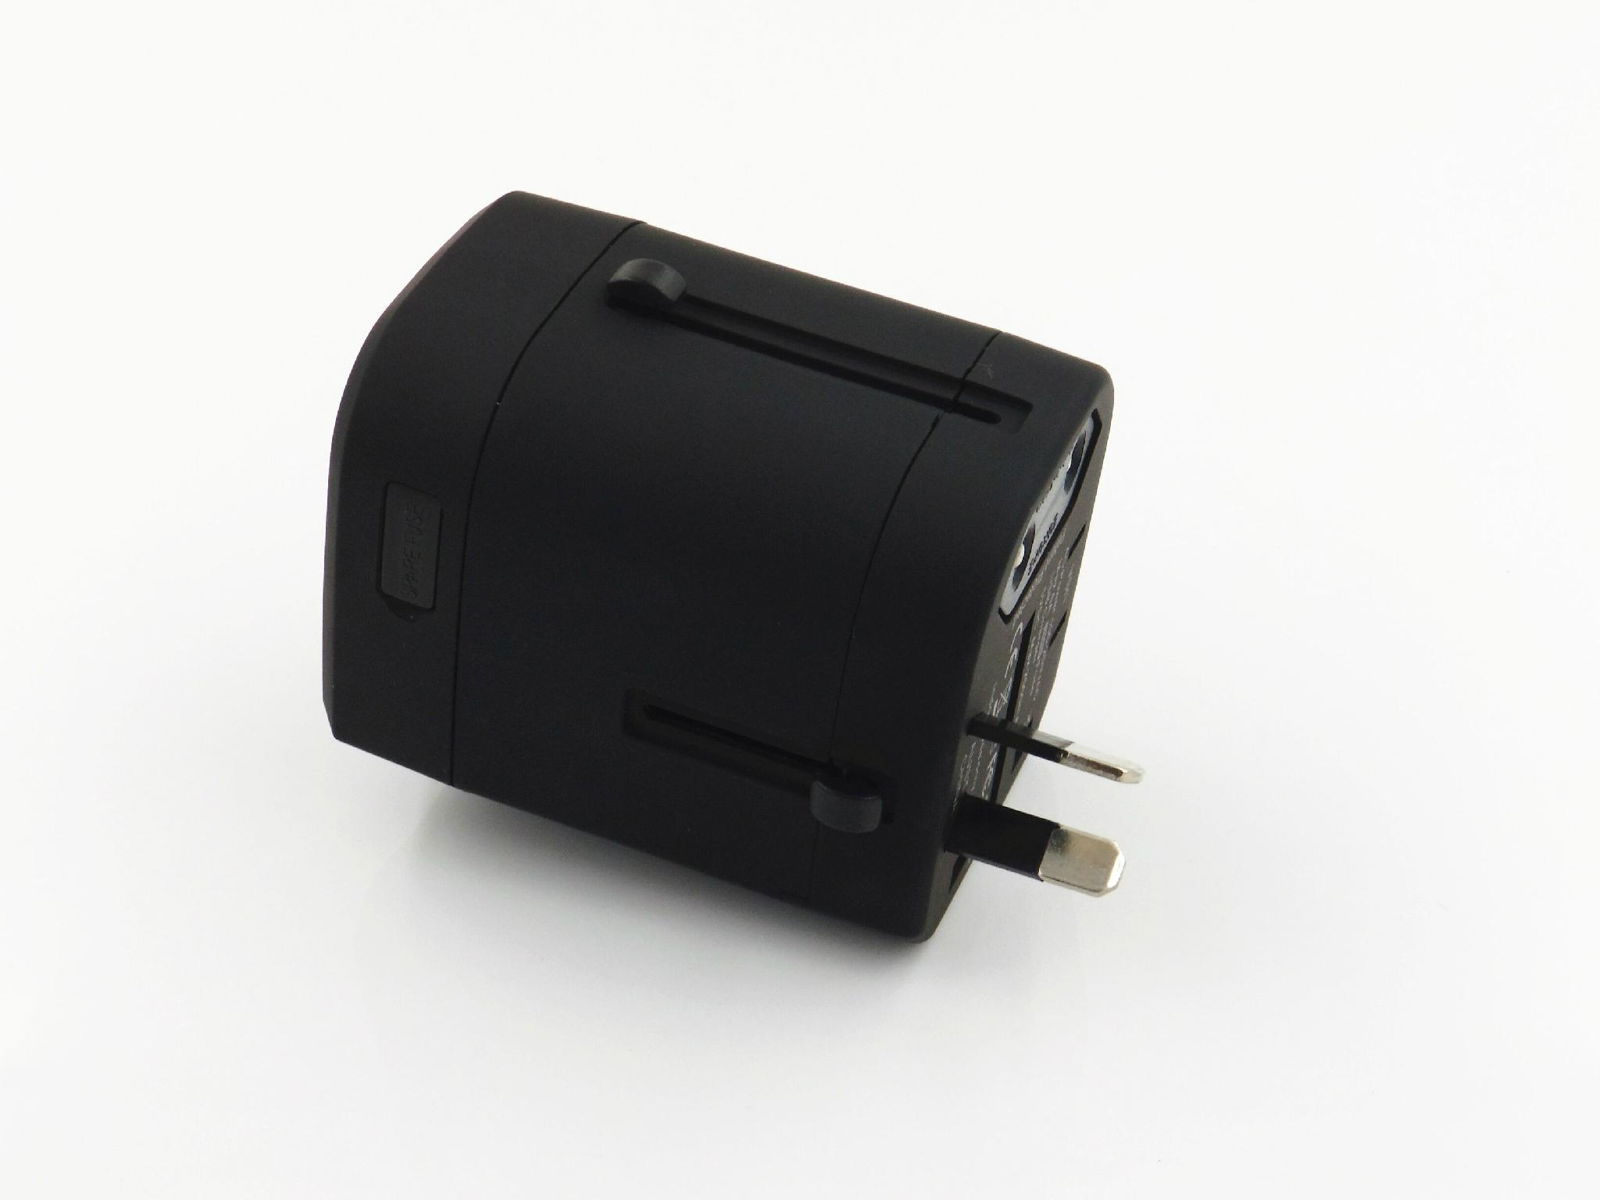 2016dual usb universal travel adapter suitable for uk european south africa plug 5